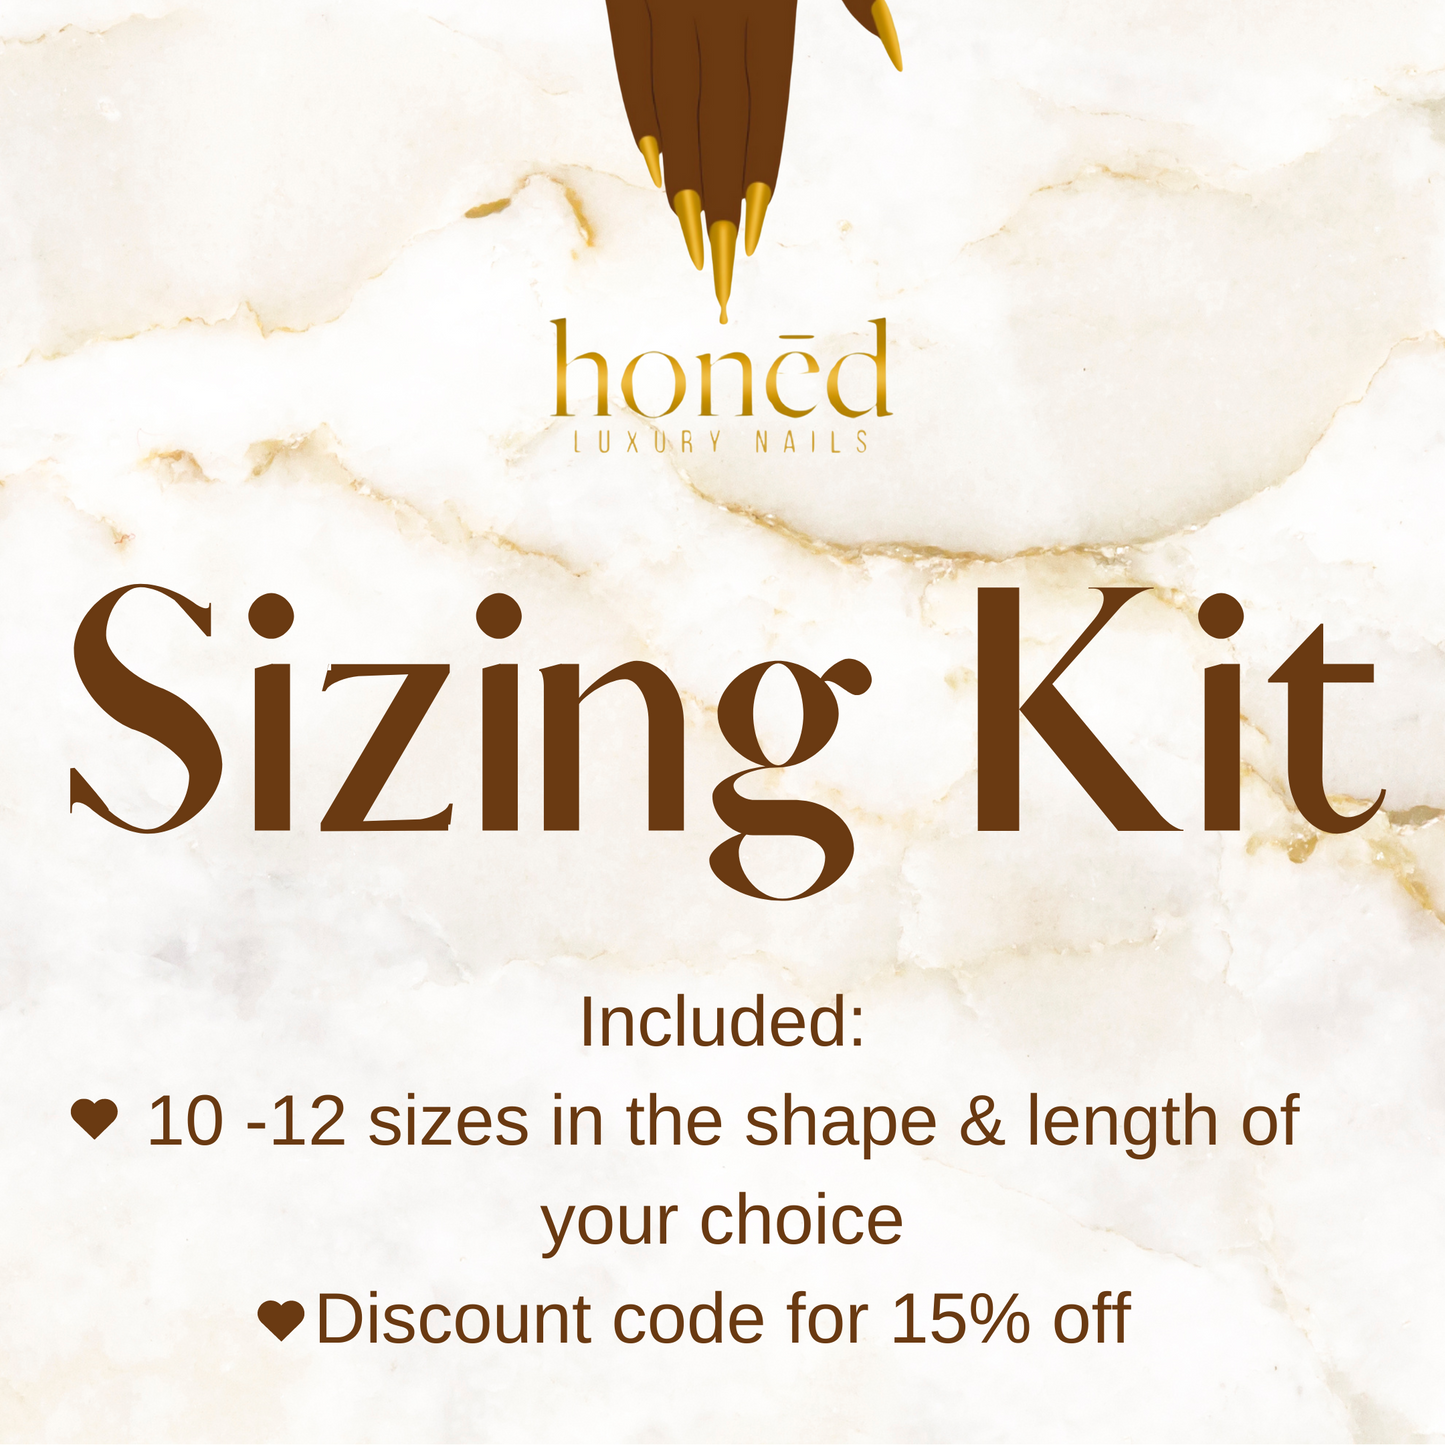 Sizing Kit (comes with 15% off discount code)